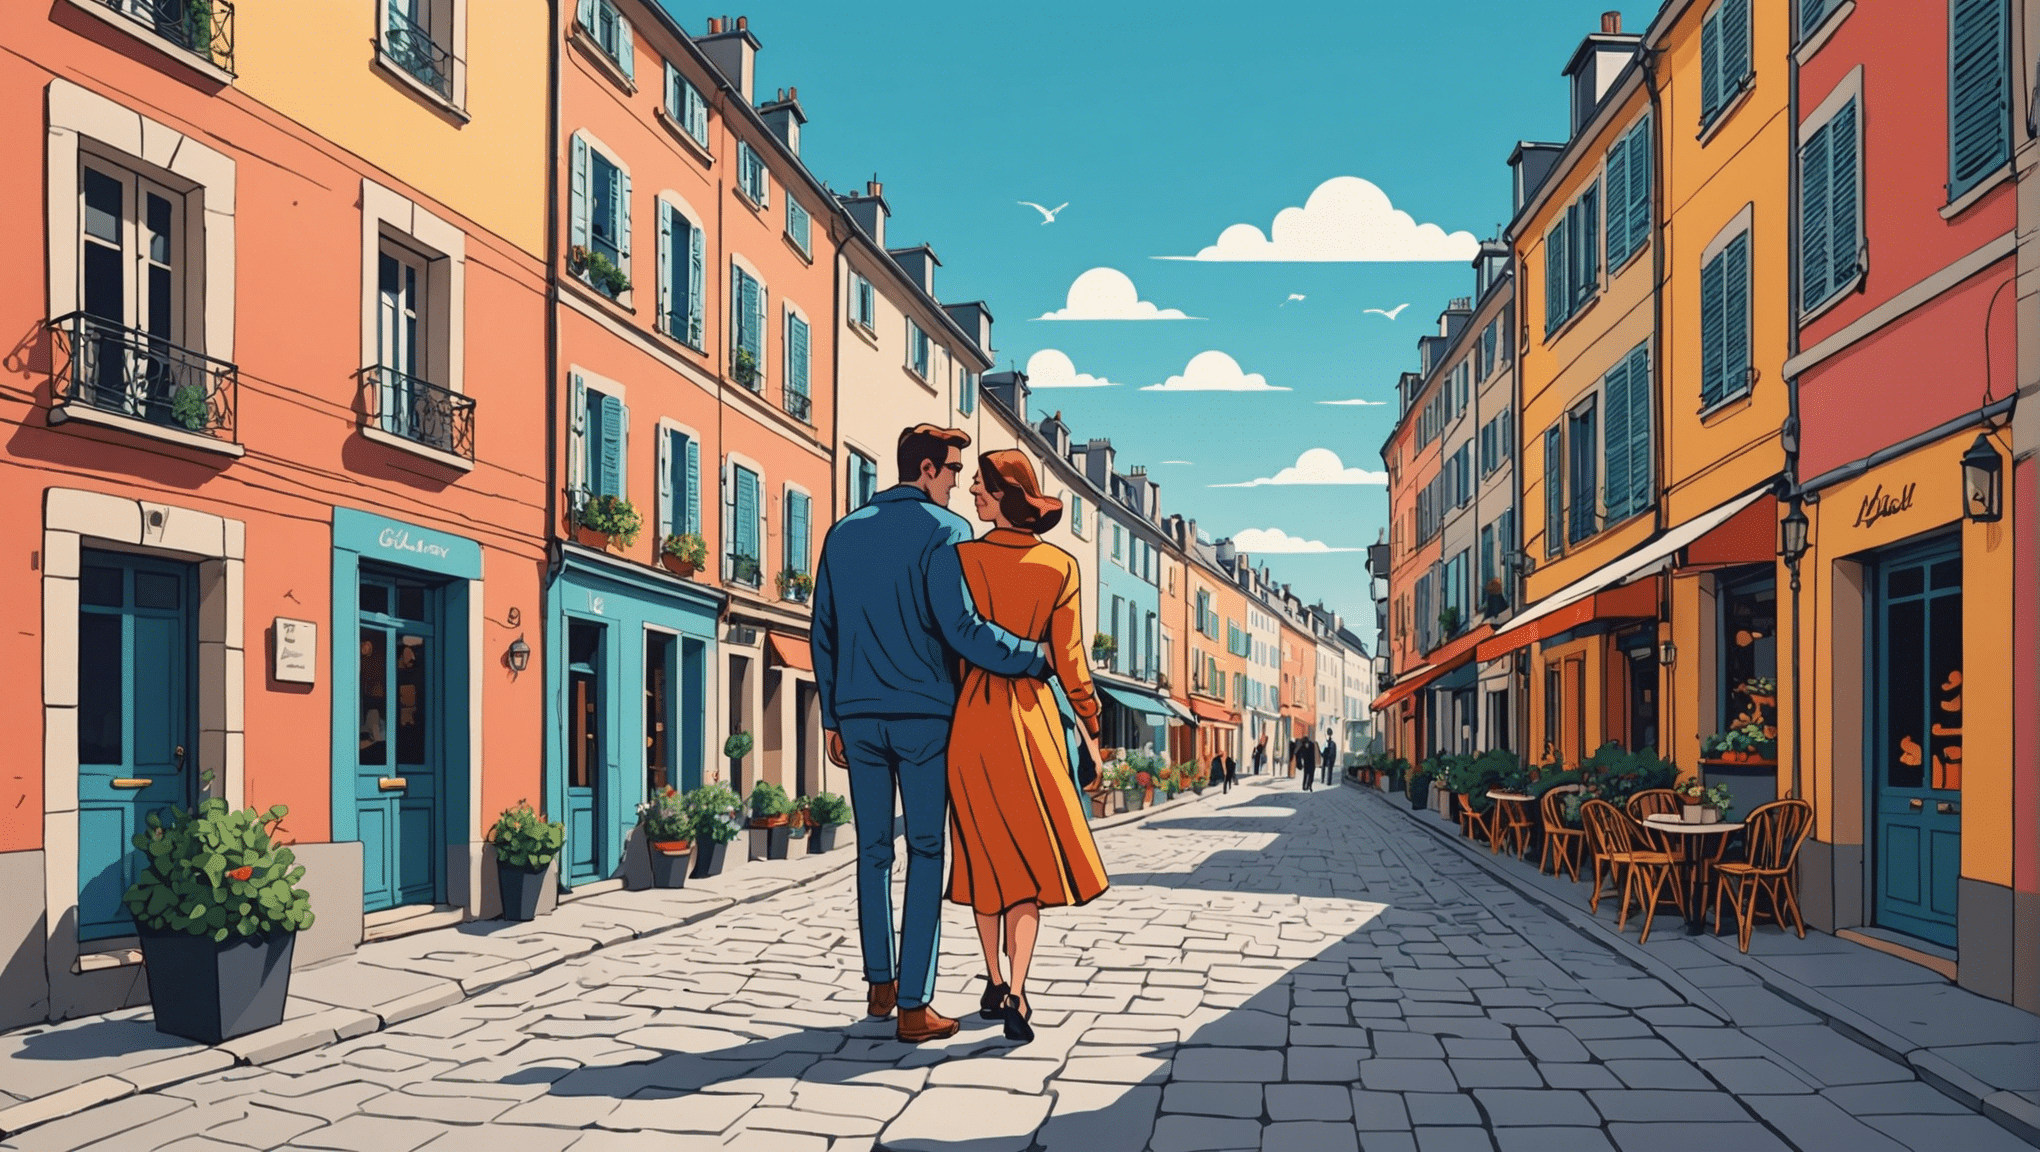 discover the best destinations to spend a romantic weekend in France, ideas for romantic places and unforgettable activities for a perfect getaway for two.